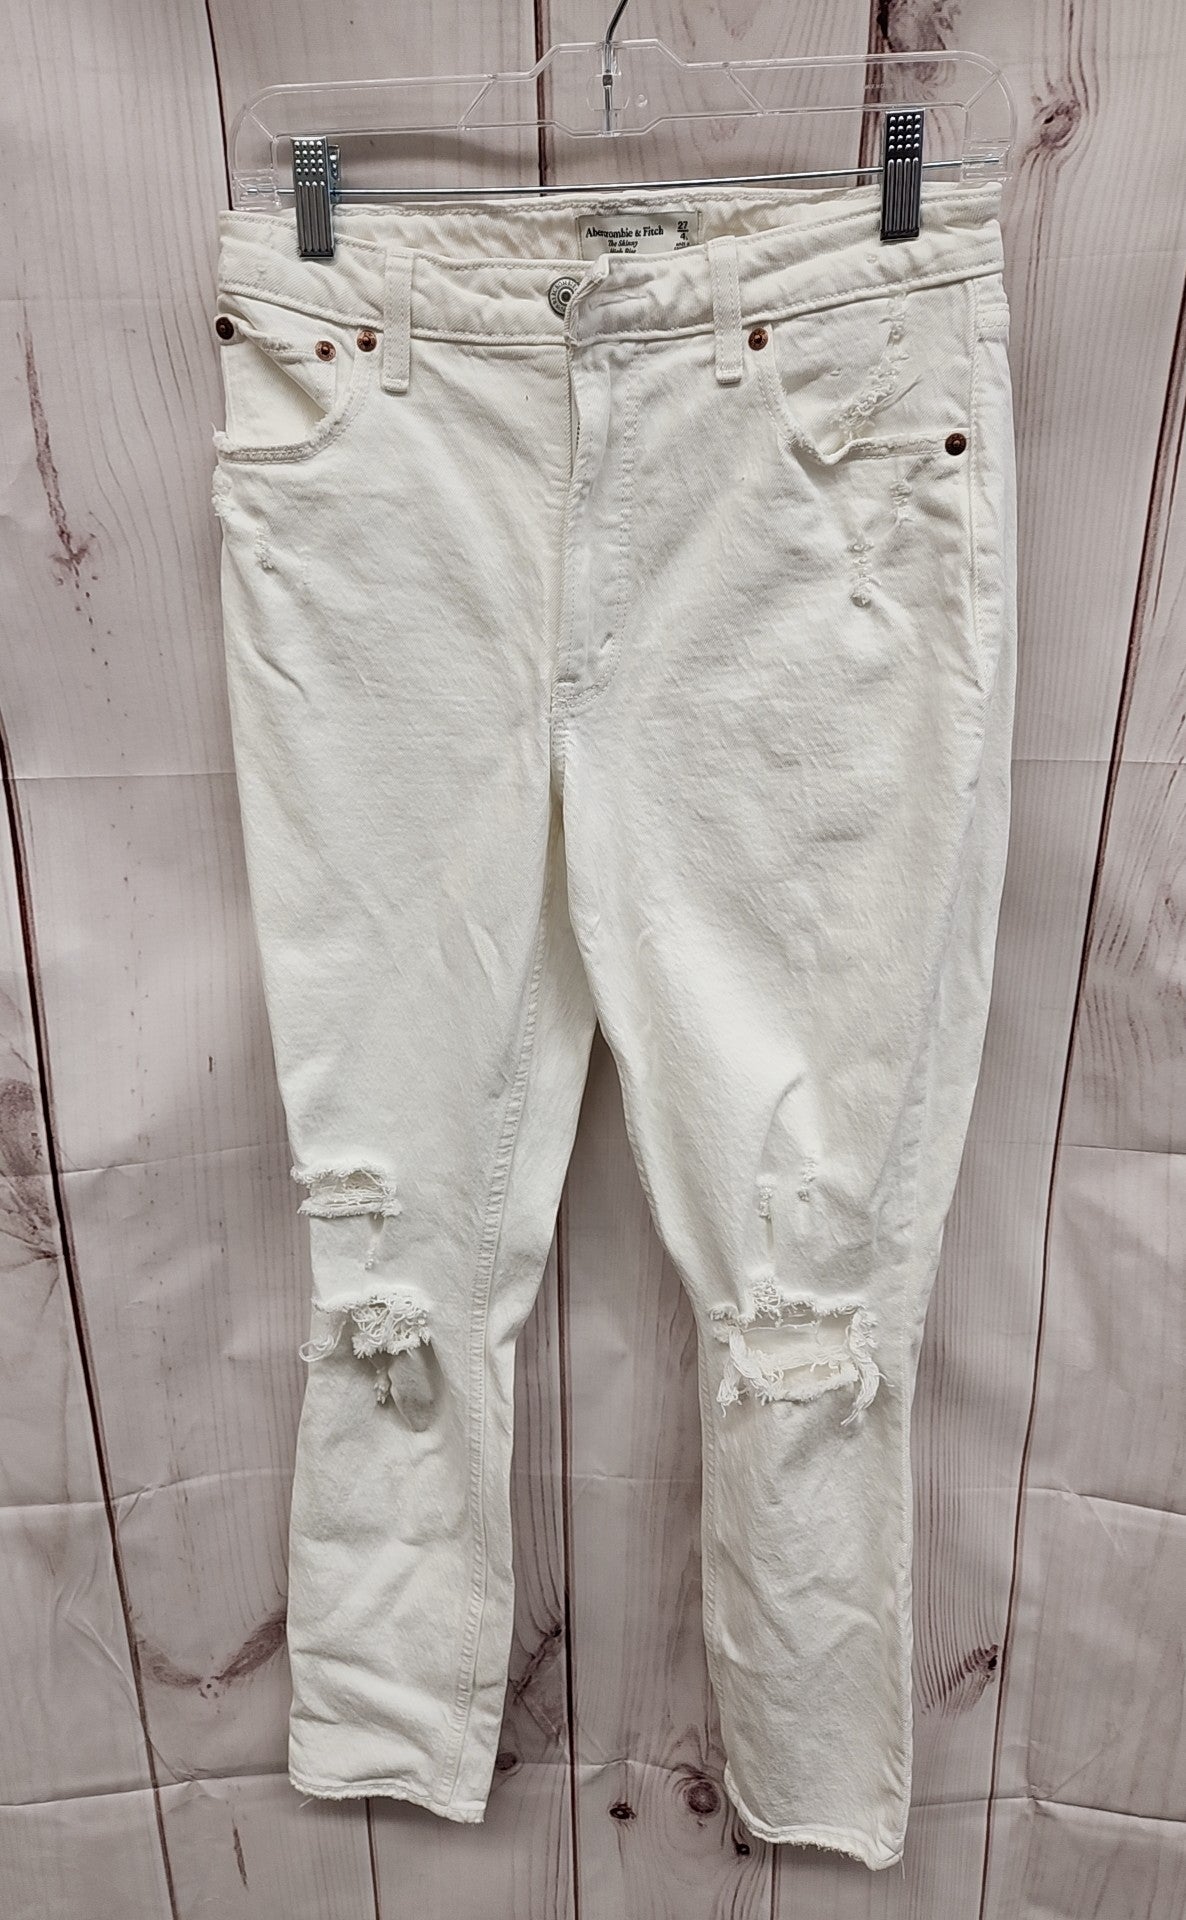 Abercrombie & Fitch Women's Size 27 (3-4) The Skinny High Rise White Jeans